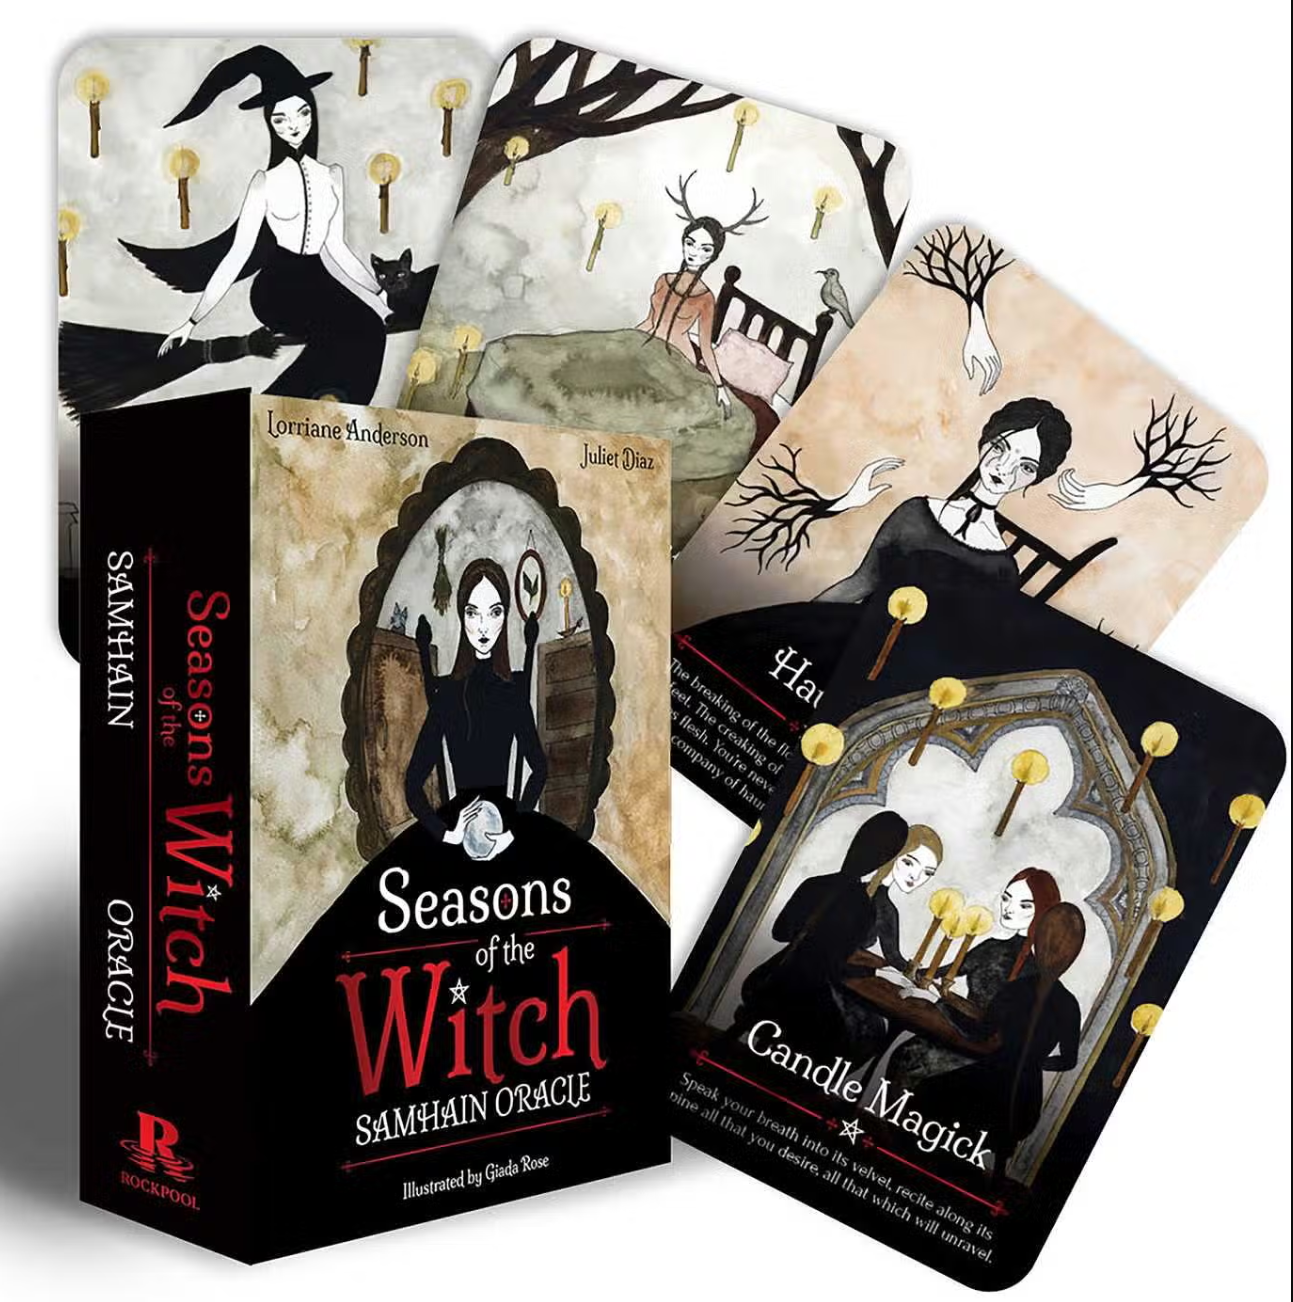 Seasons of the Witch Samhain Oracle